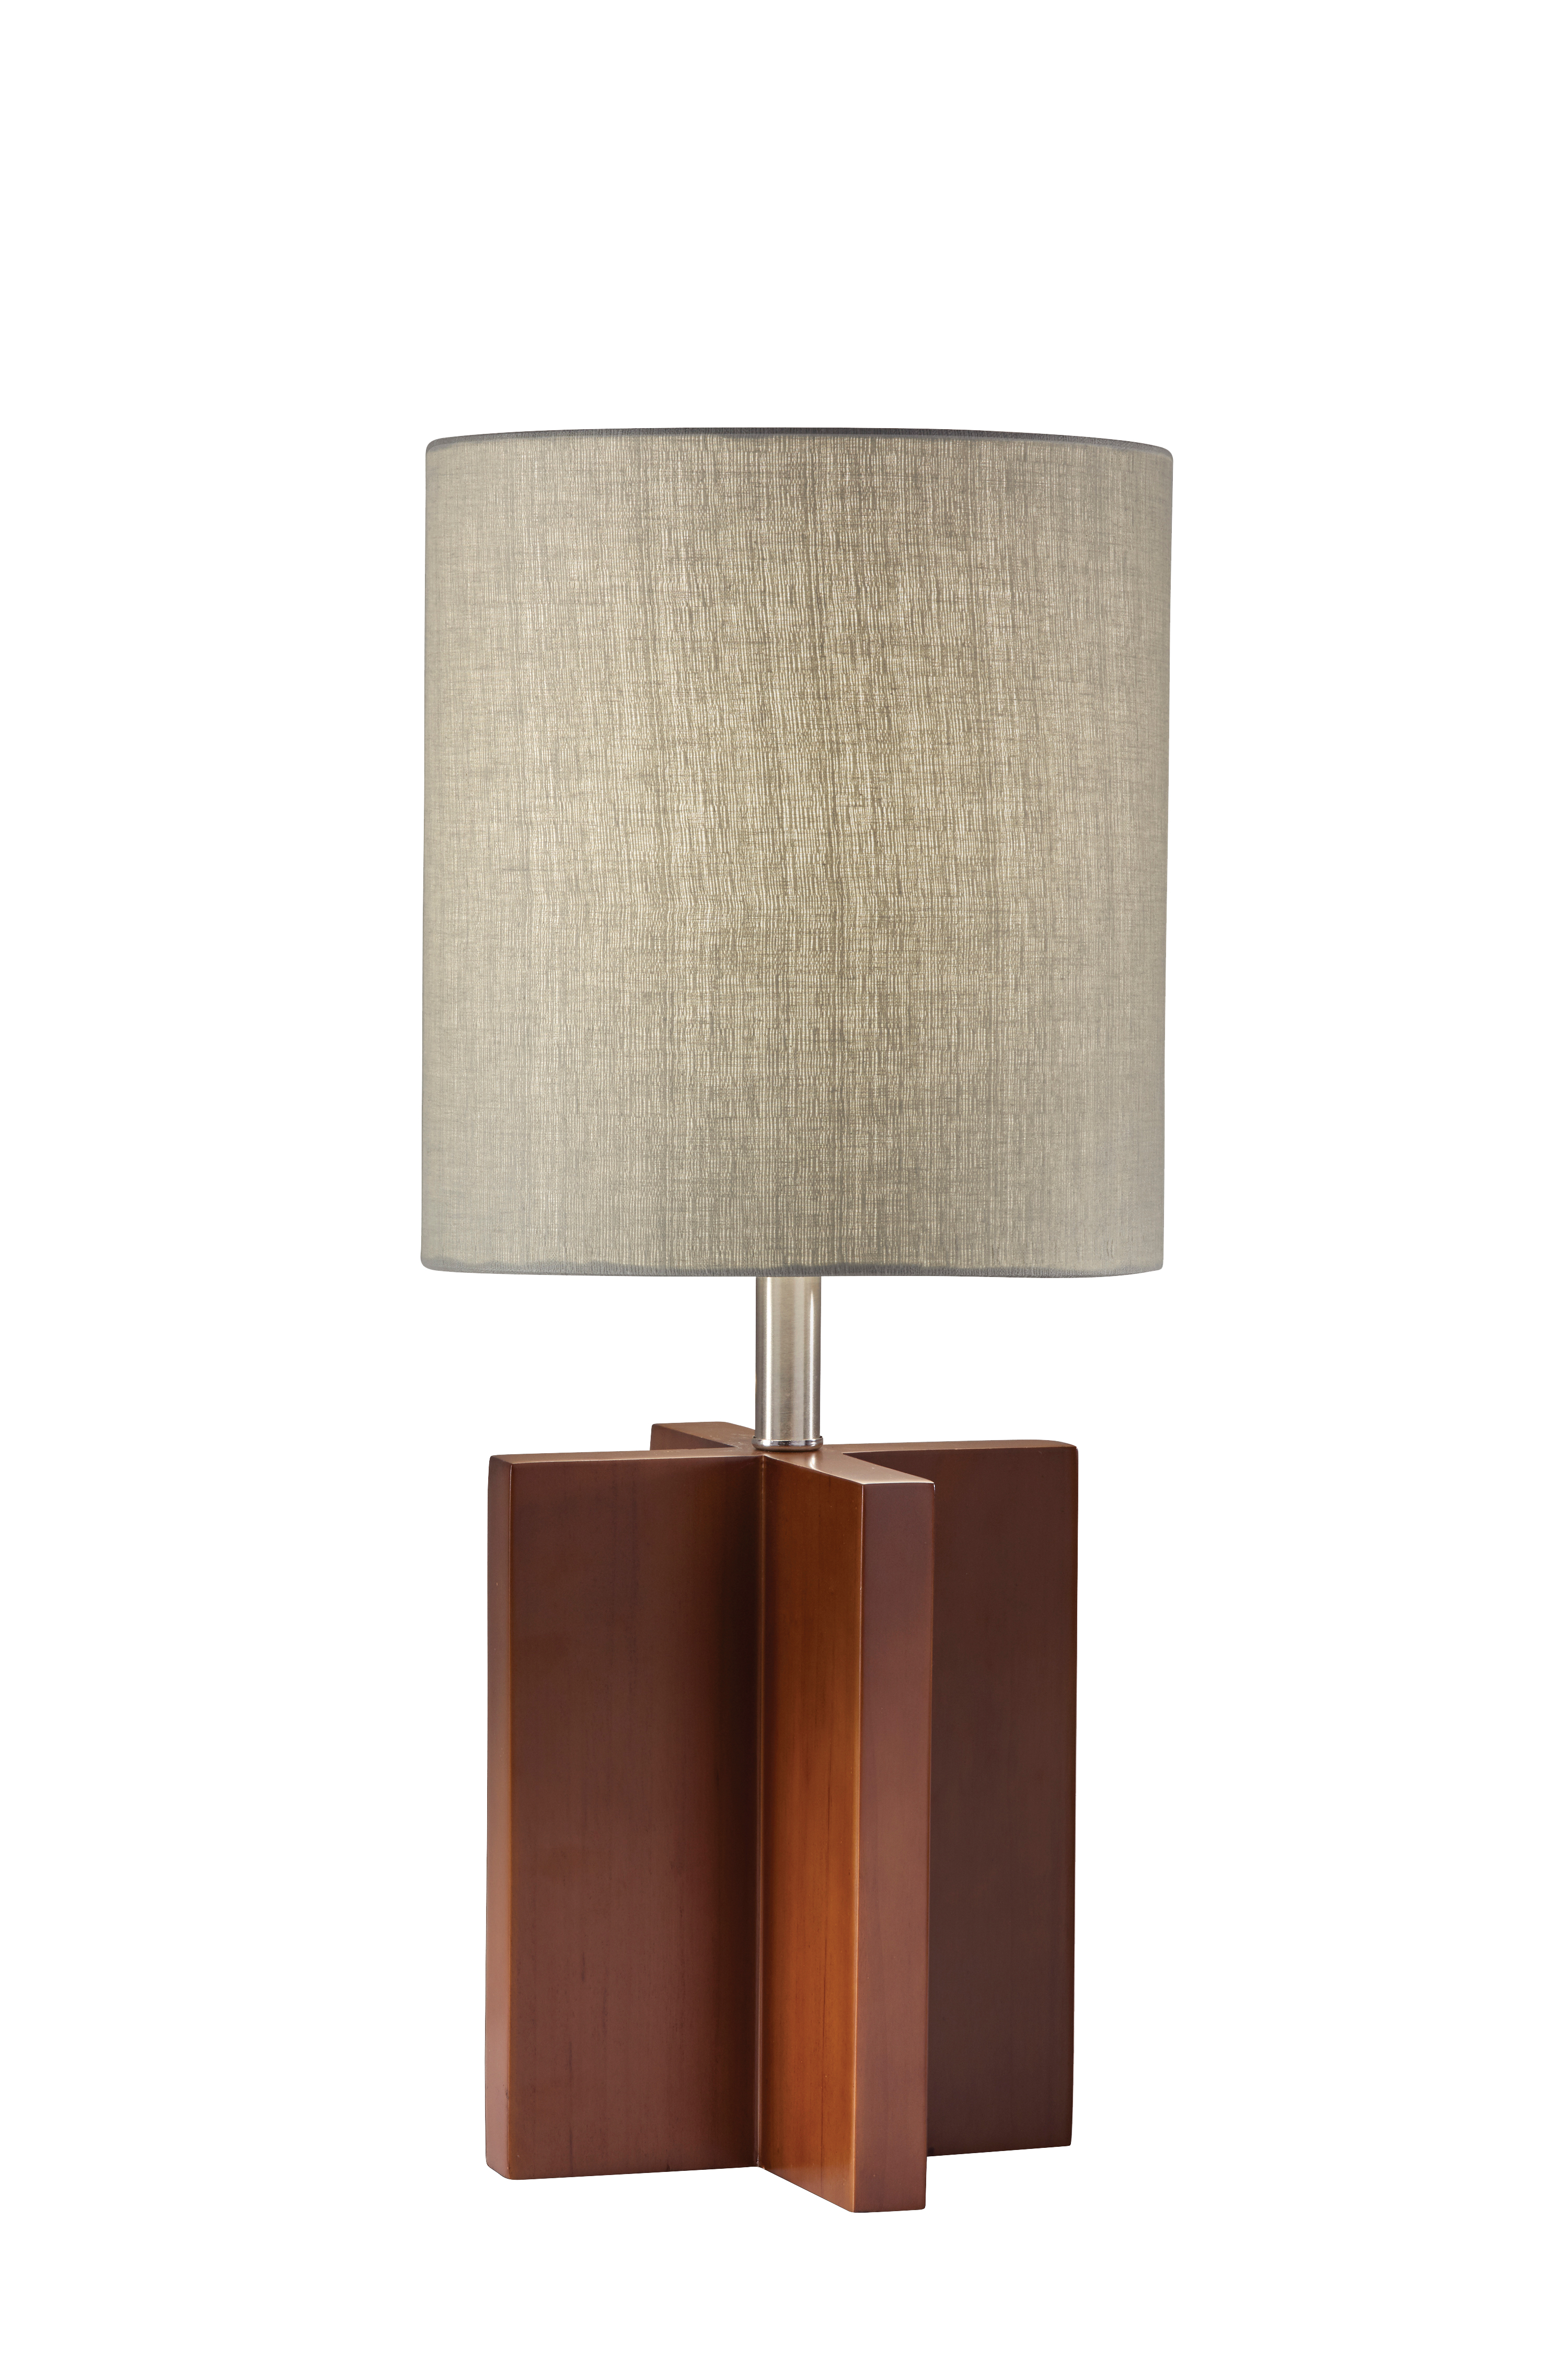 Adesso Marcus table lamp